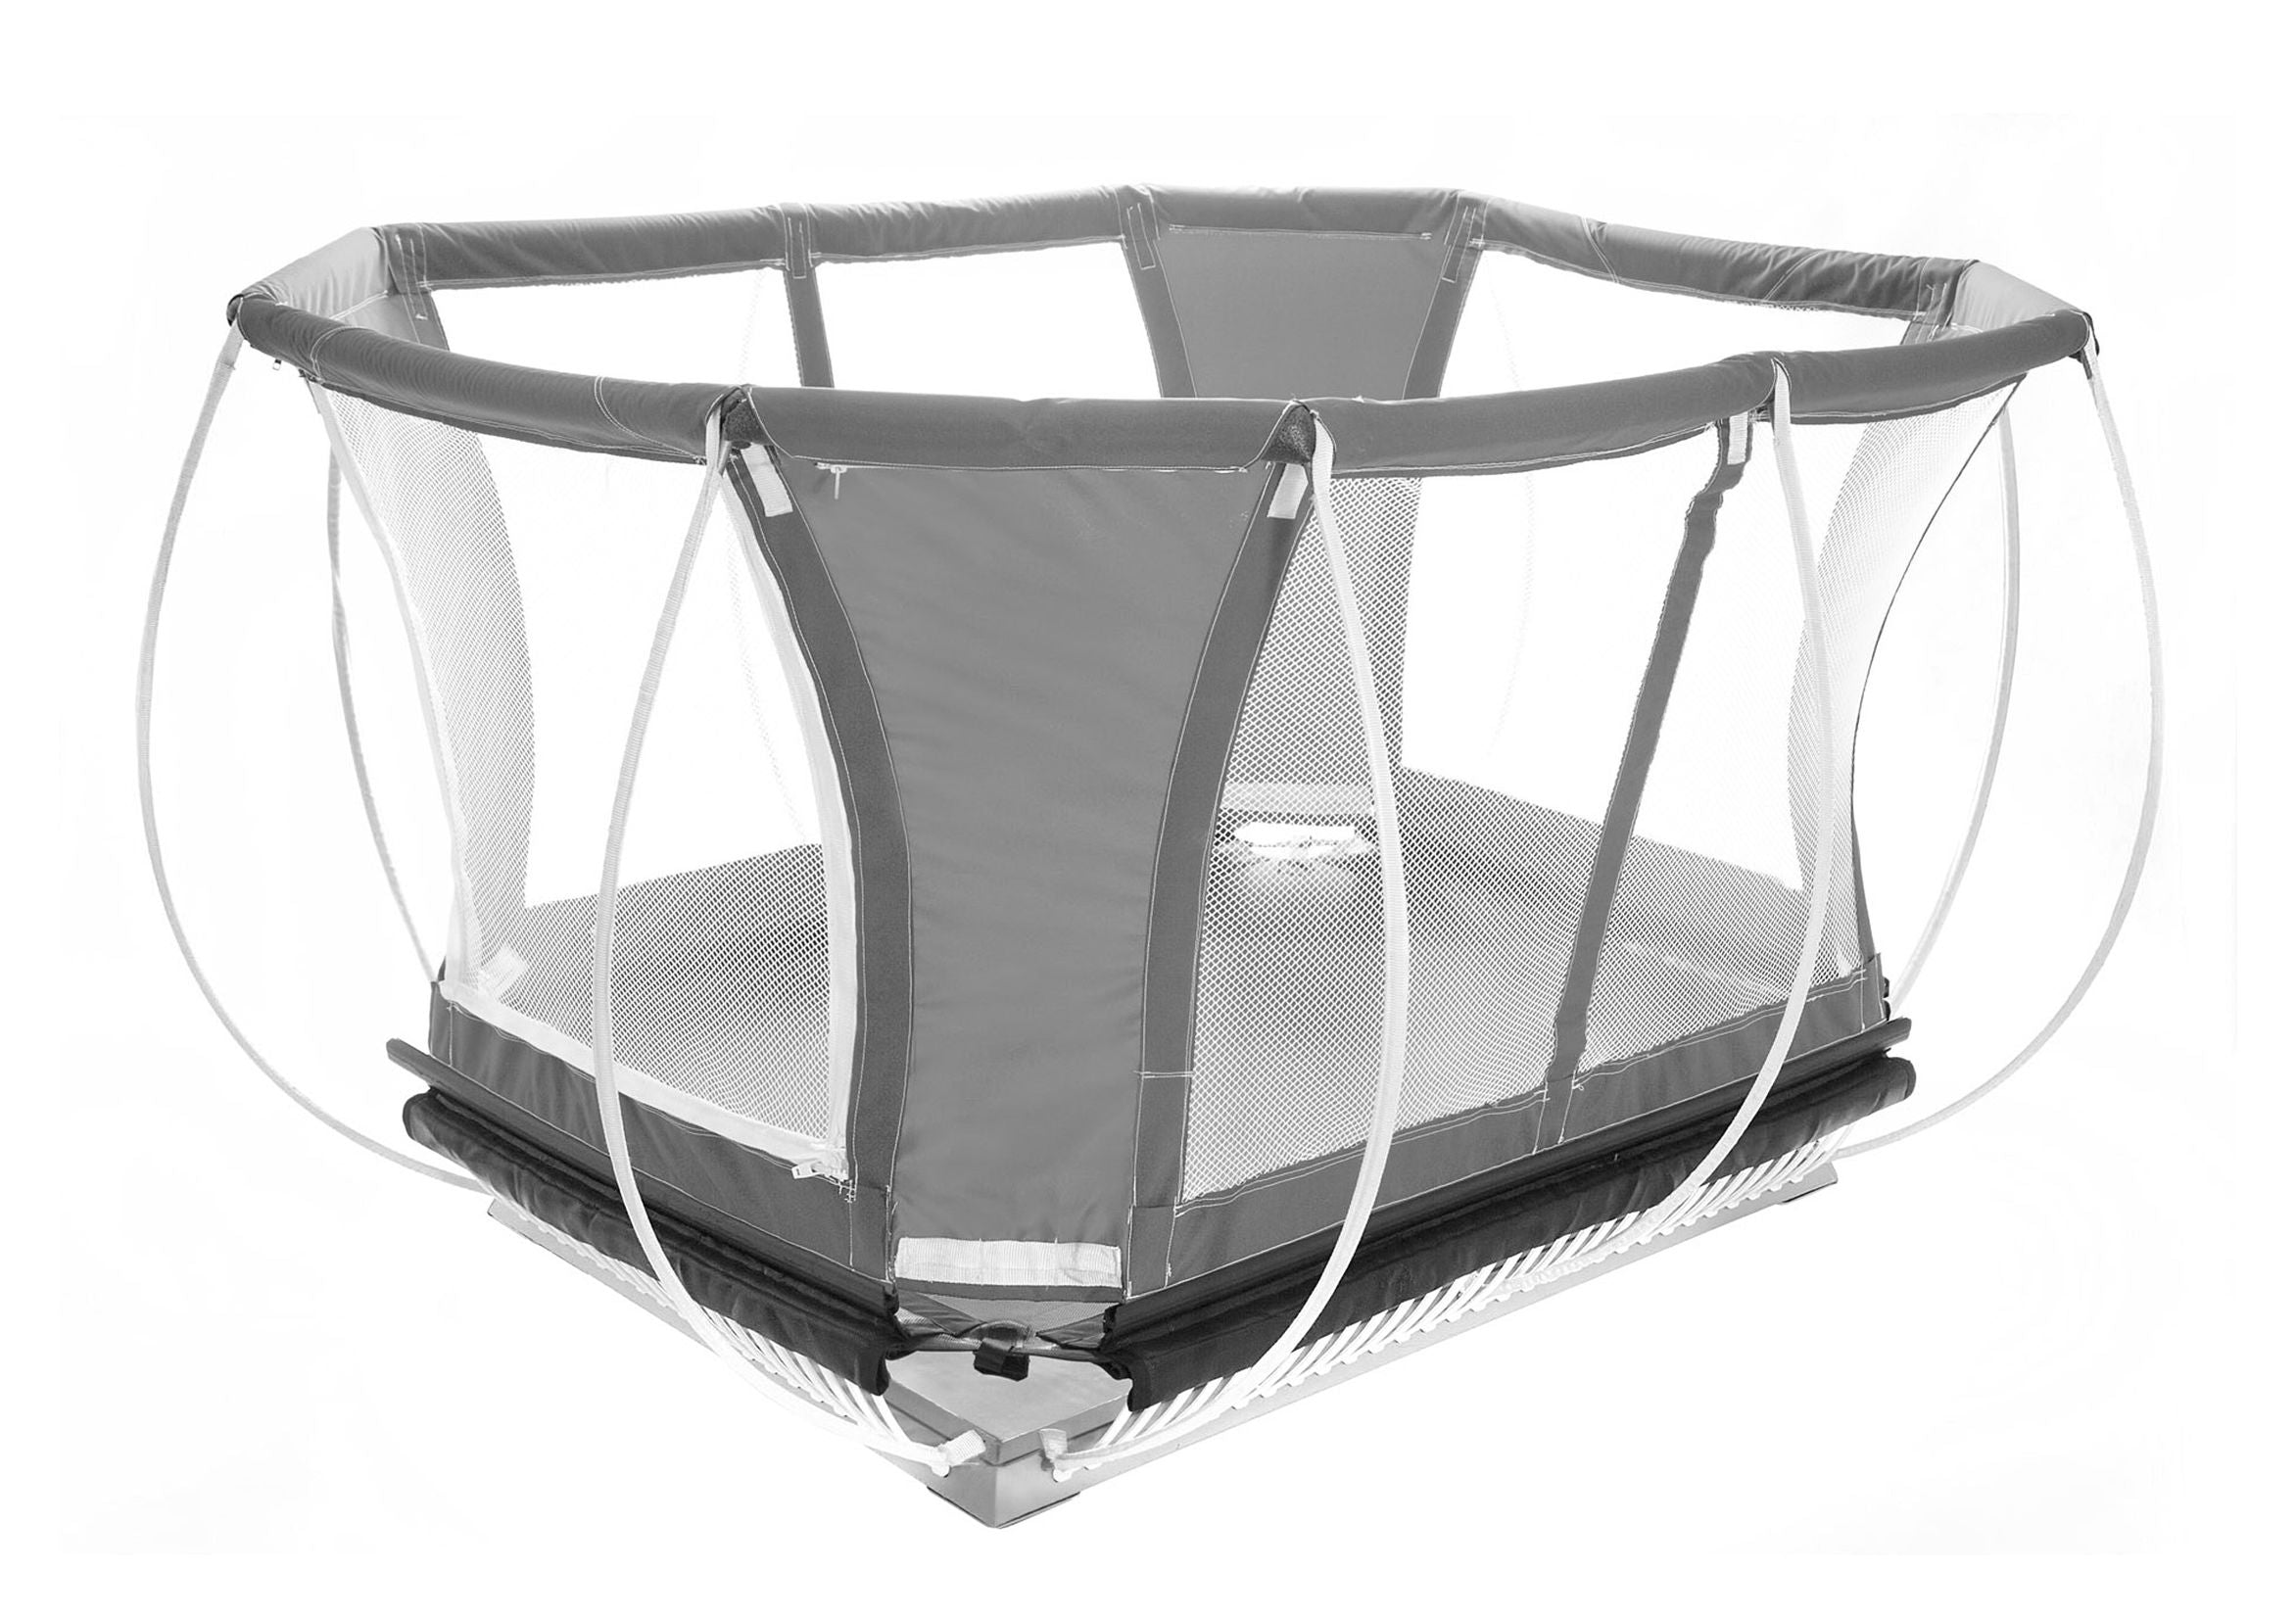 Springfree 3in1 Mini Trampoline with Enclosure - Outdoor Trampoline Activity Toy